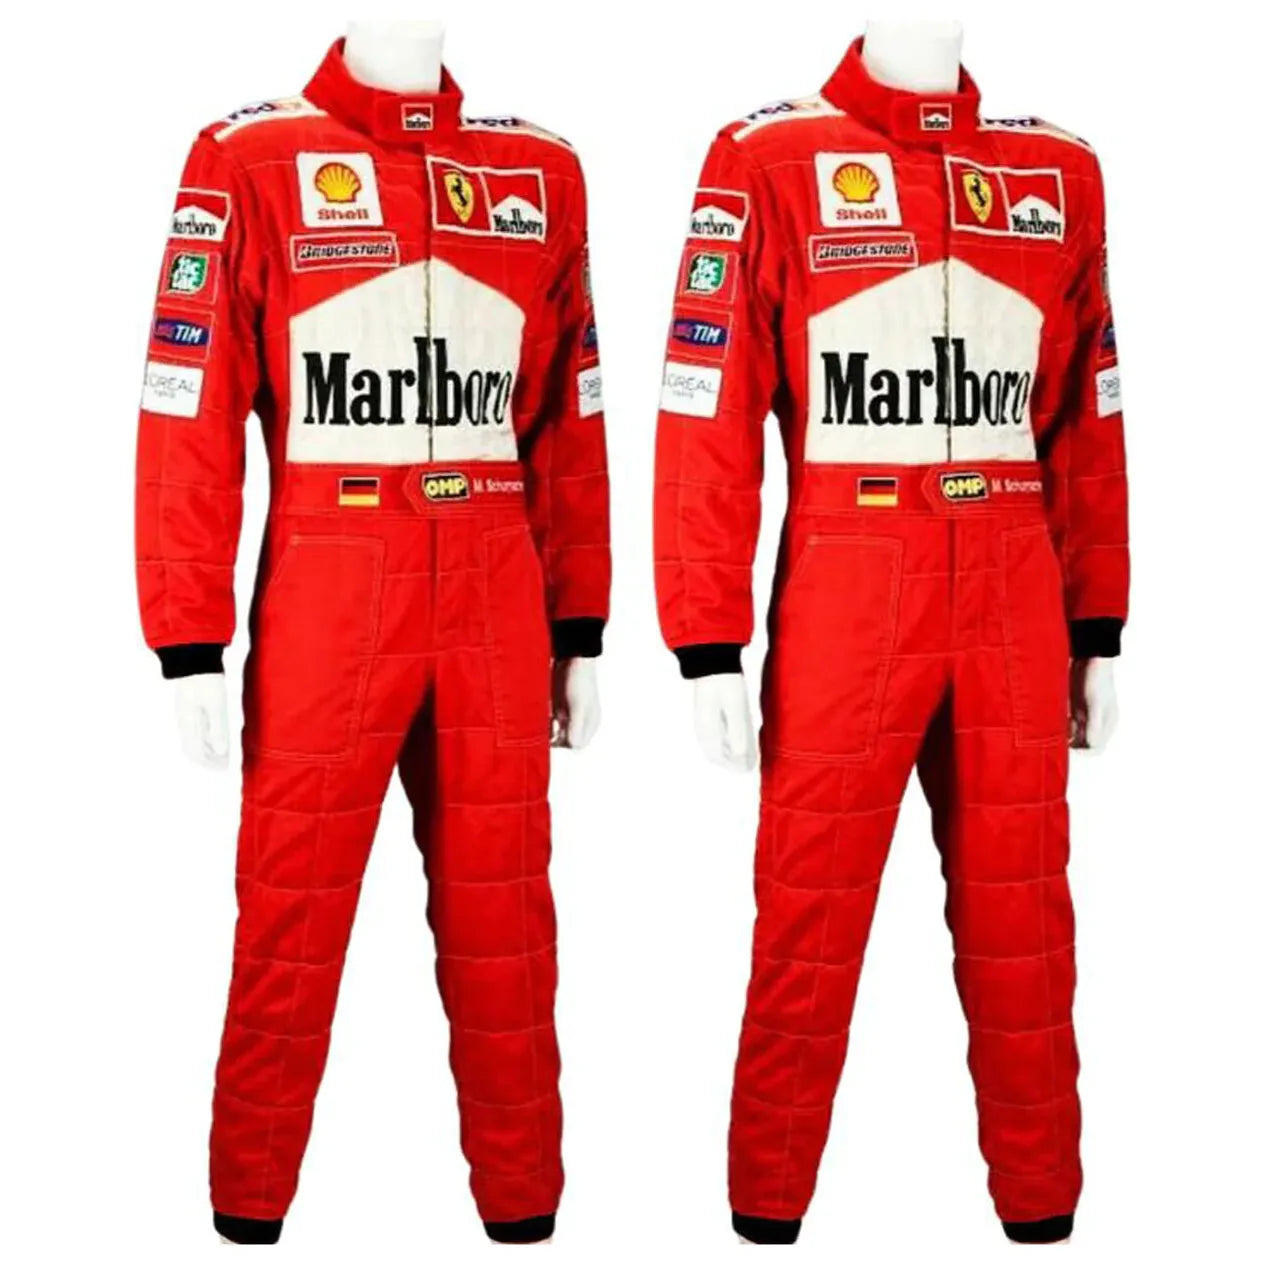 Go kart racing Sublimation Protective clothing Racing gear Suit N-093